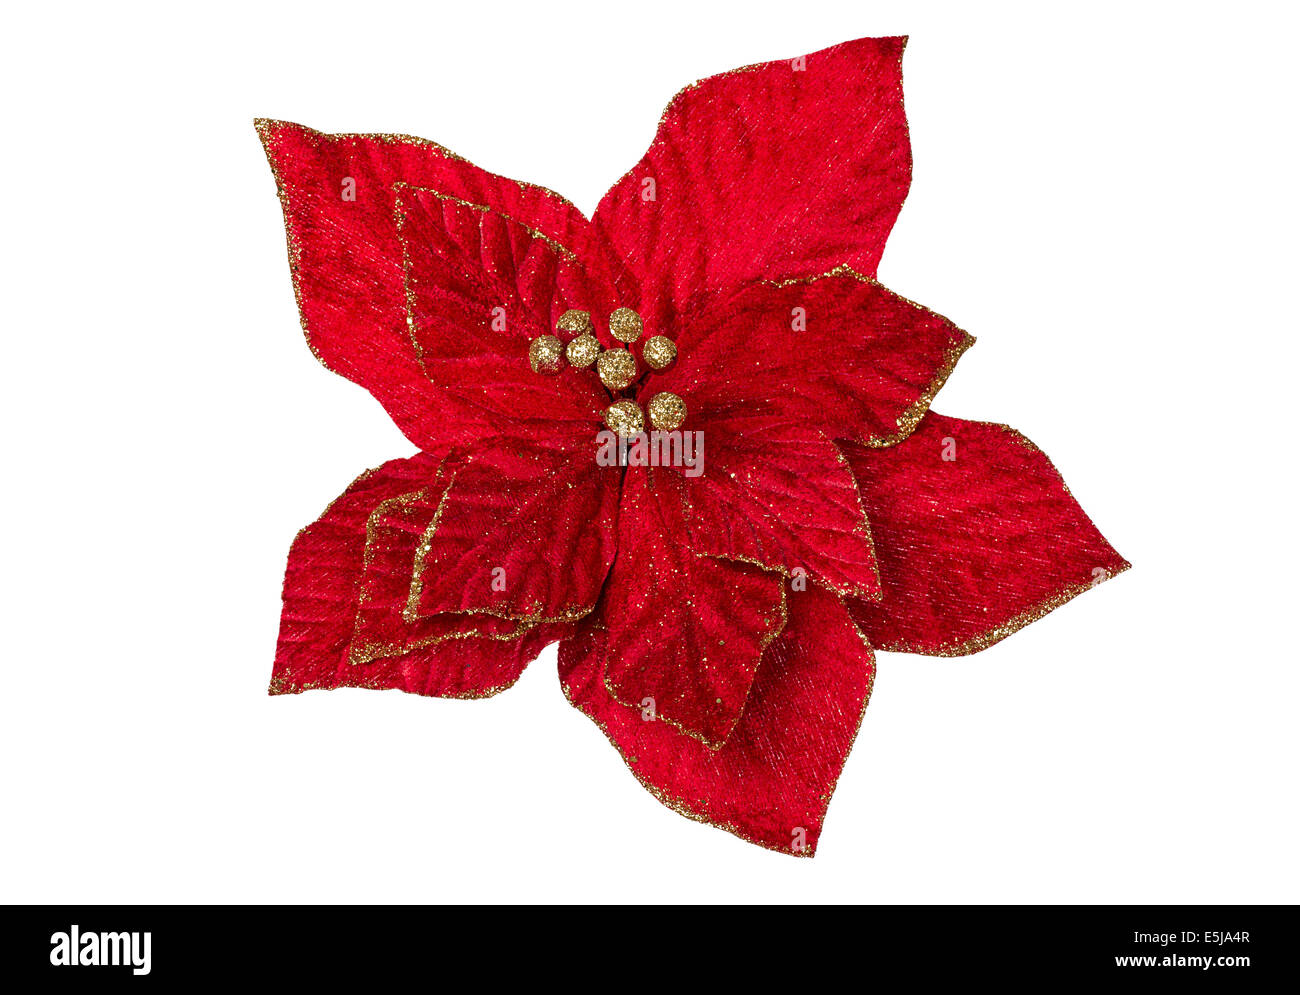 Christmas Material, X'mas Flower 、pinus, Christmas Hat And Stocking On Red  Background Stock Photo, Picture and Royalty Free Image. Image 194316622.